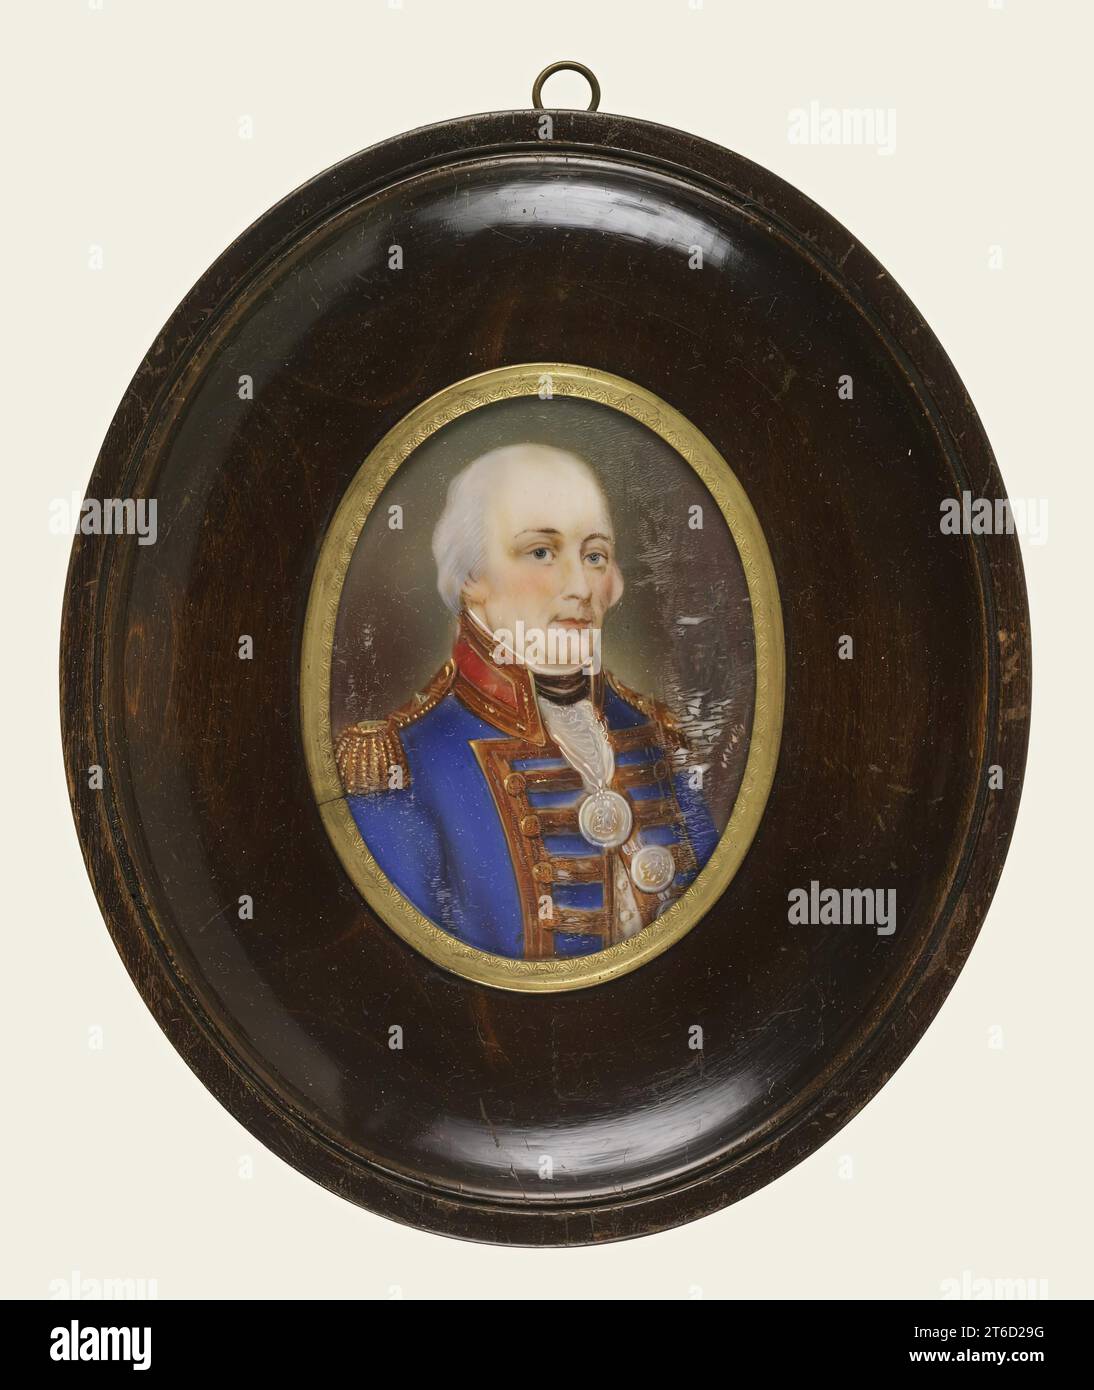 Admiral Keith, 1st quarter 19th century. Admiral Lord George Keith (1746-1823) was a British naval hero. His image was disseminated in paintings and prints in the early 19th century. This miniature is an example of such commemorative images. Stock Photo